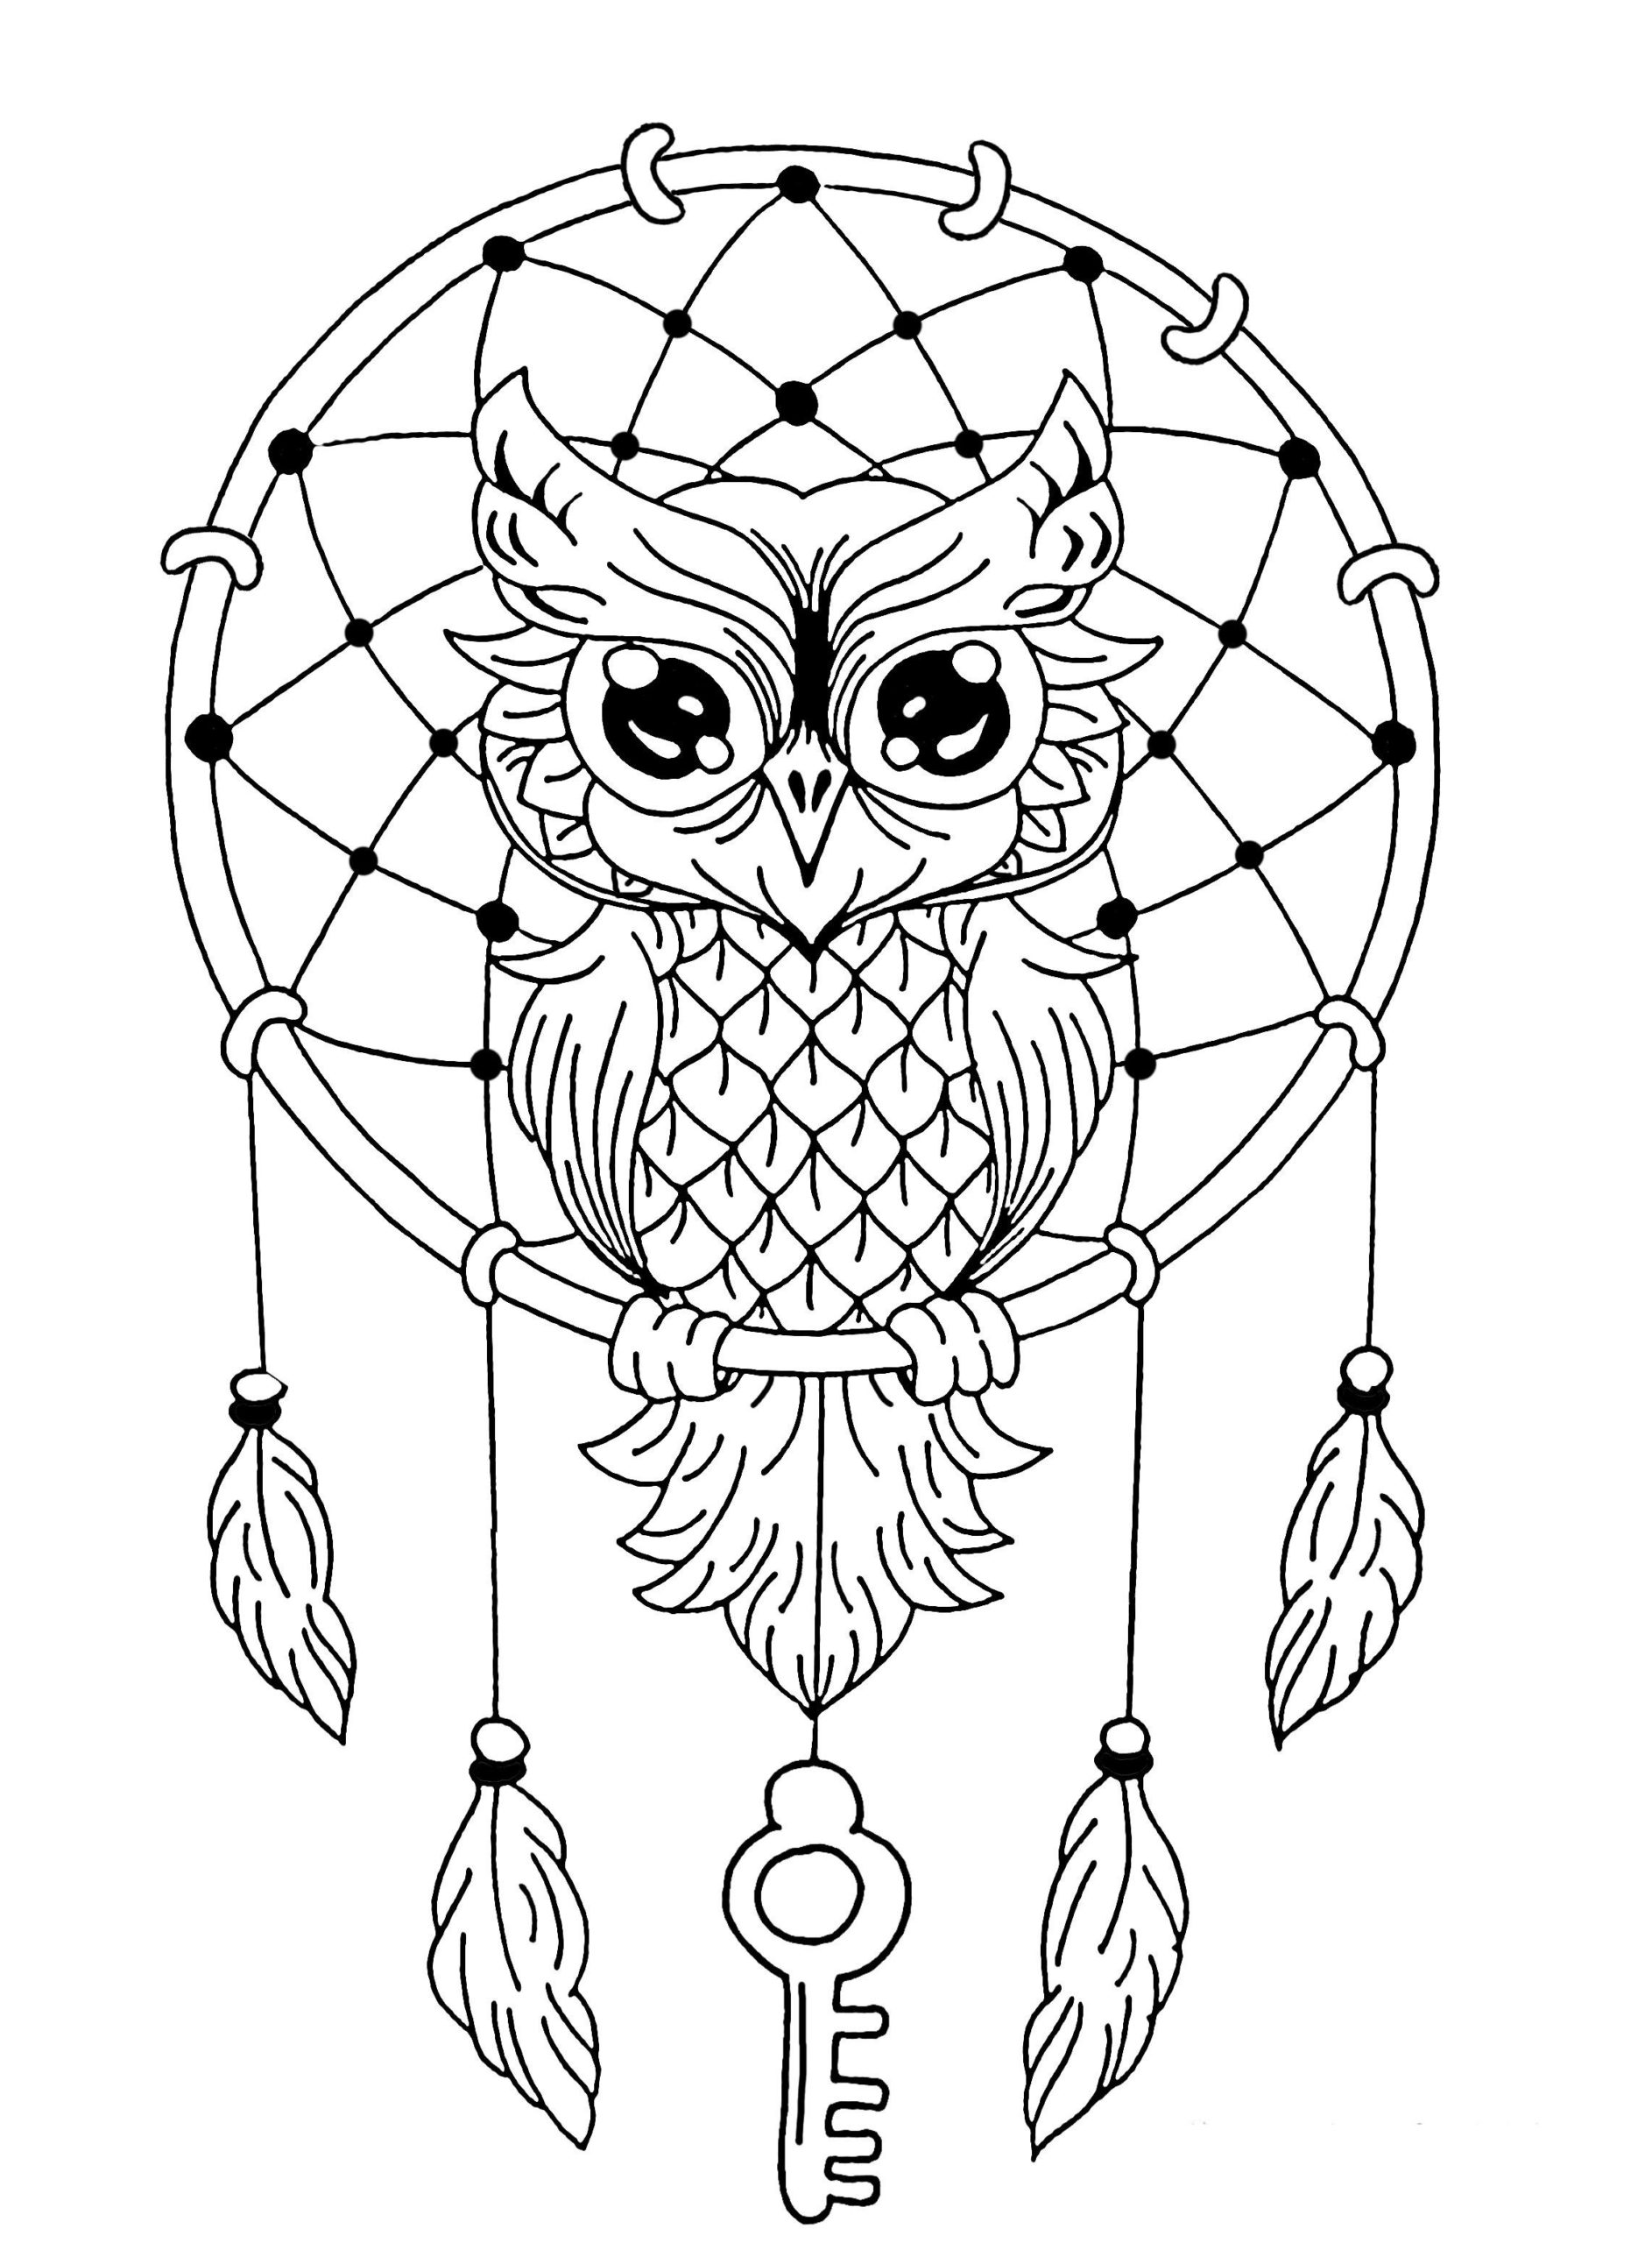 New Coloring Pages : Advanced Animal Amazing Owl For Kids ...